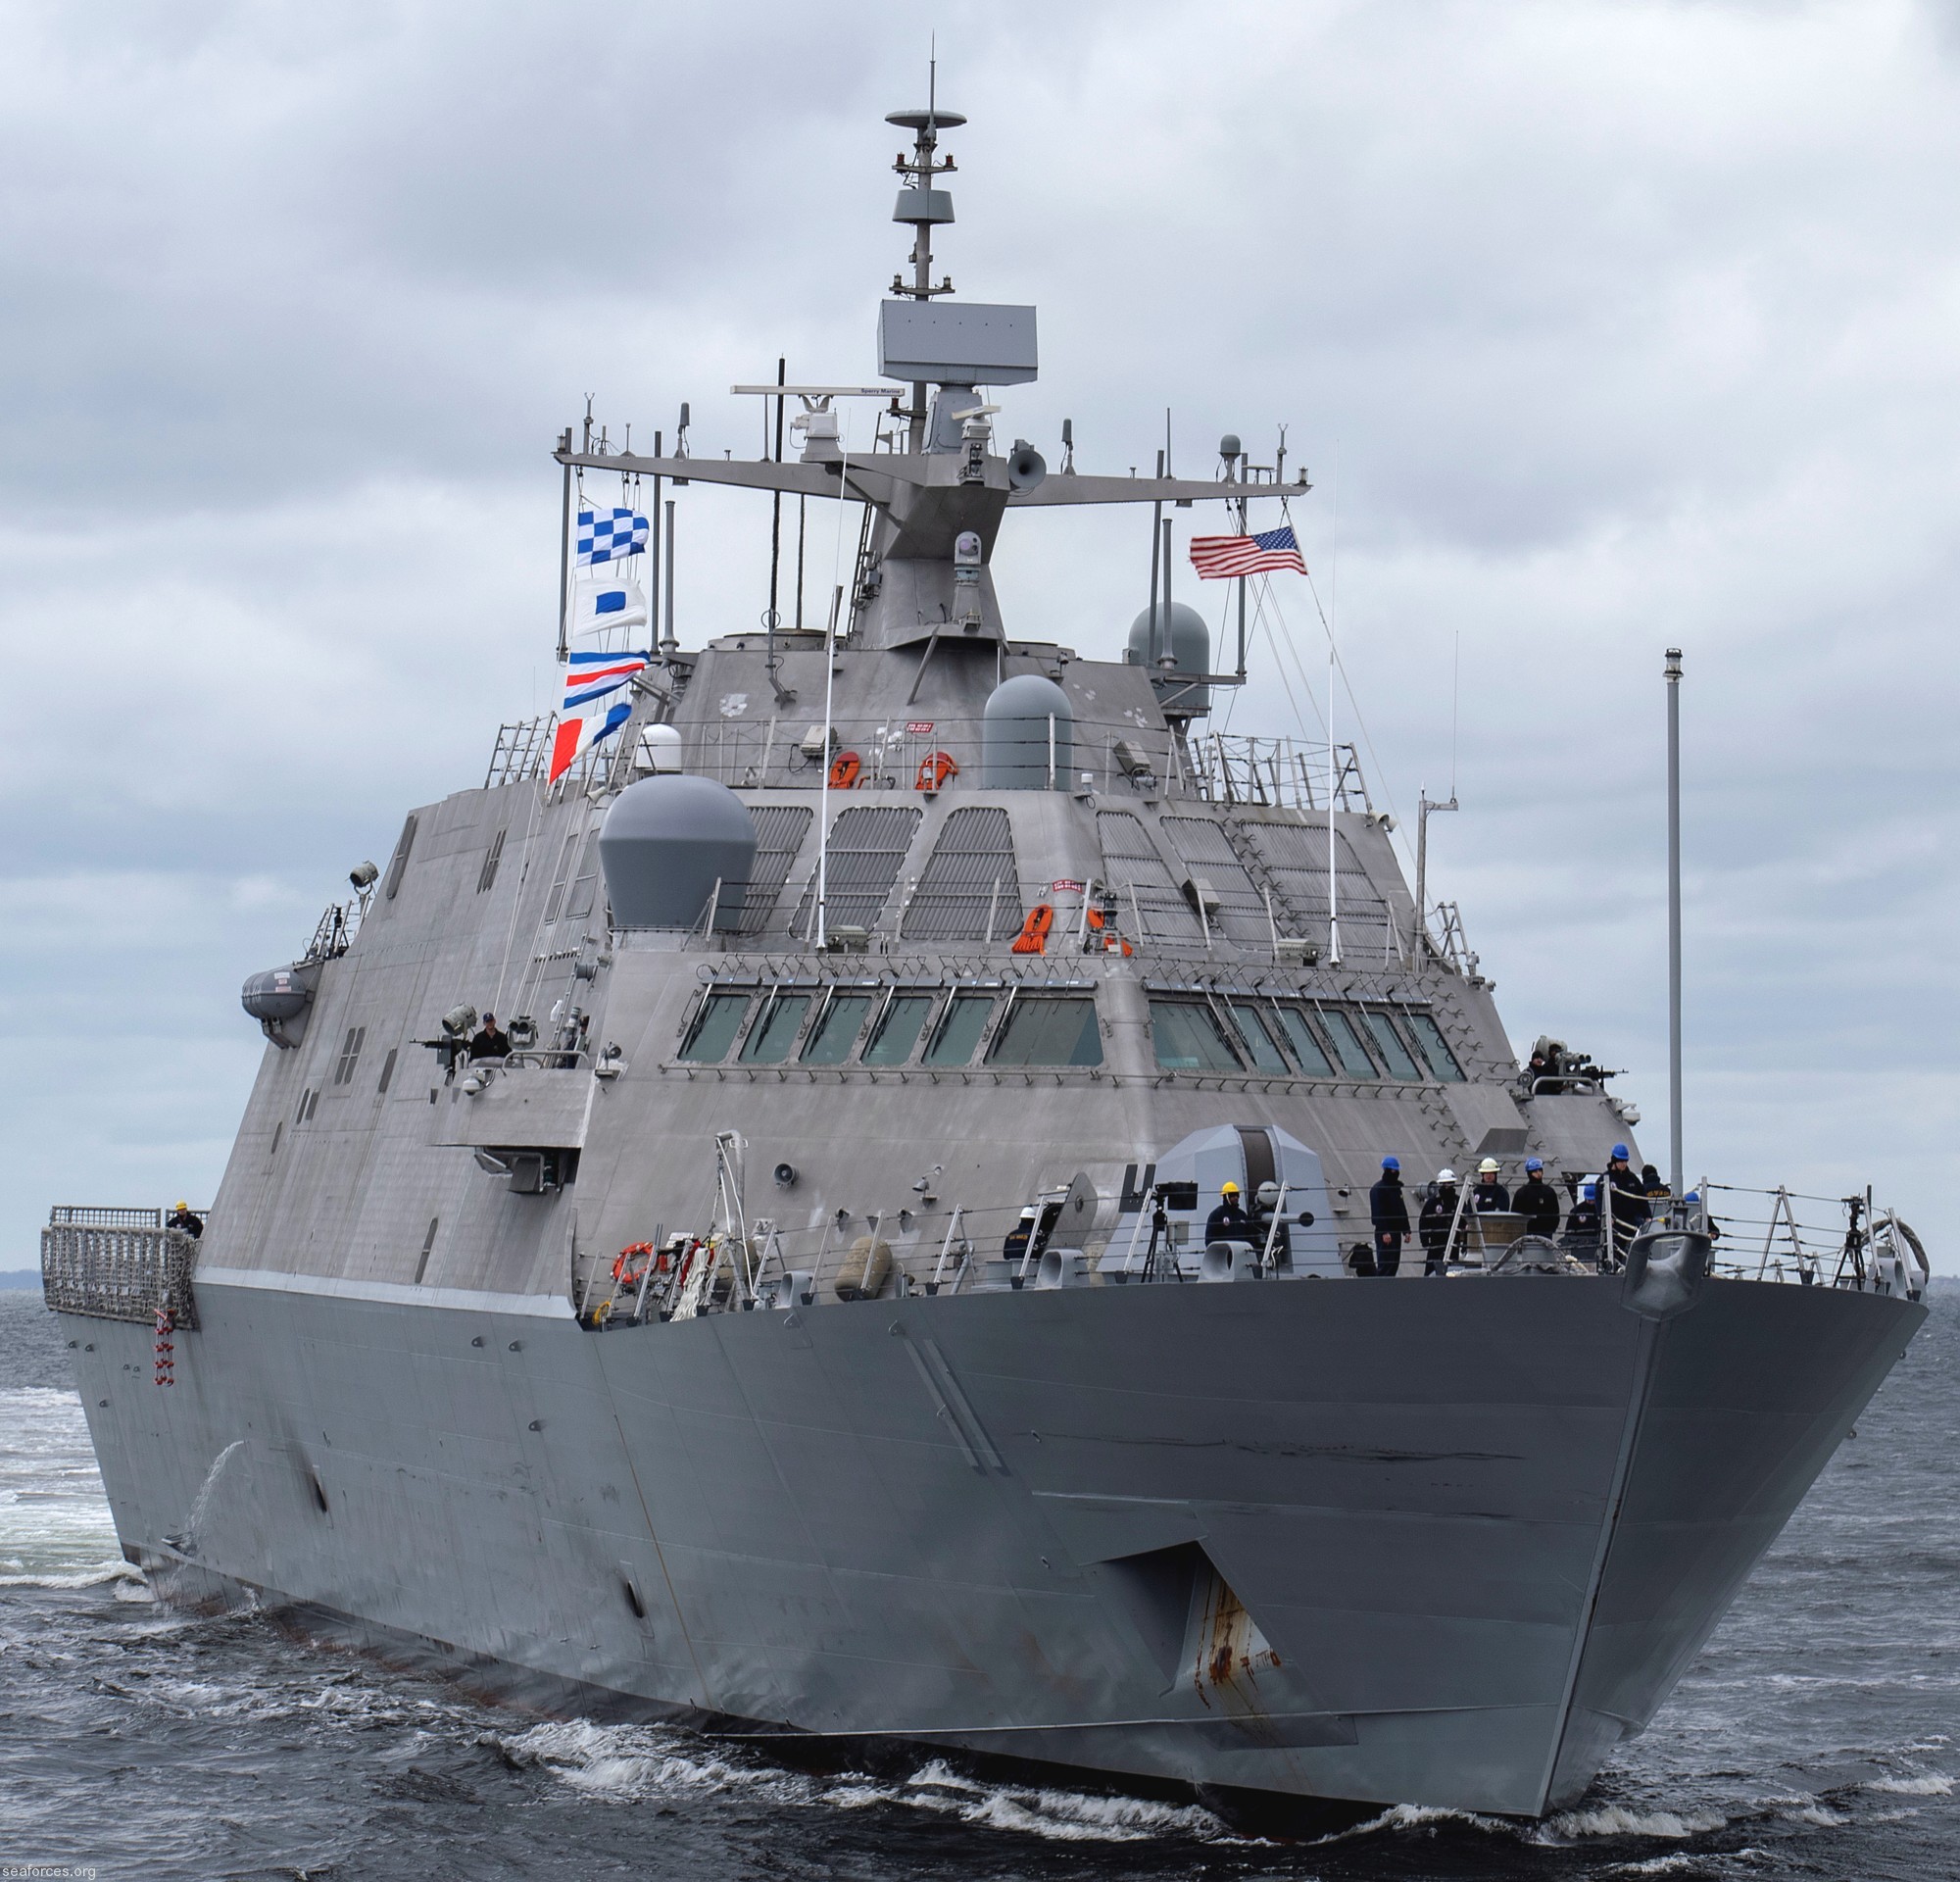 lcs-11 uss sioux city freedom class littoral combat ship us navy 04 groton